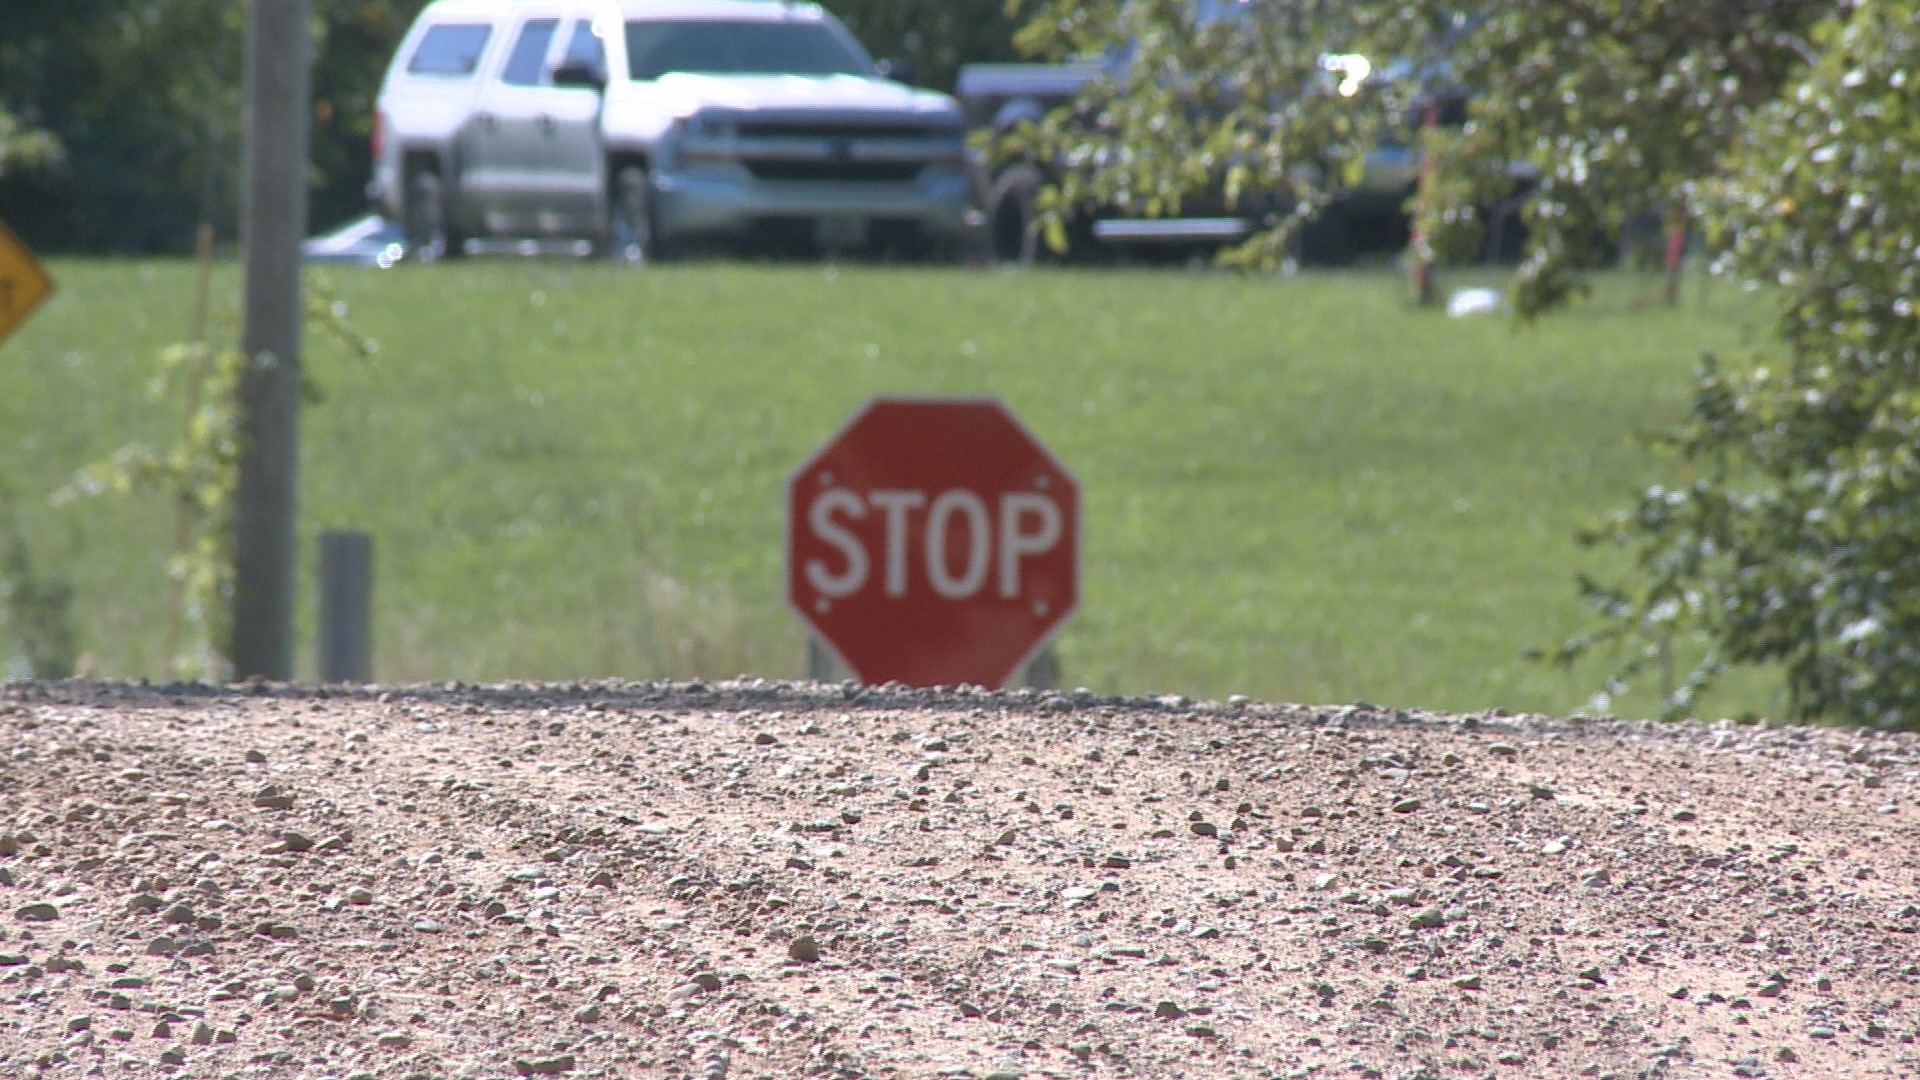 We are learning more about a deadly crash in Ottawa County that left a 14-year-old dead, and four other kids injured including an infant.